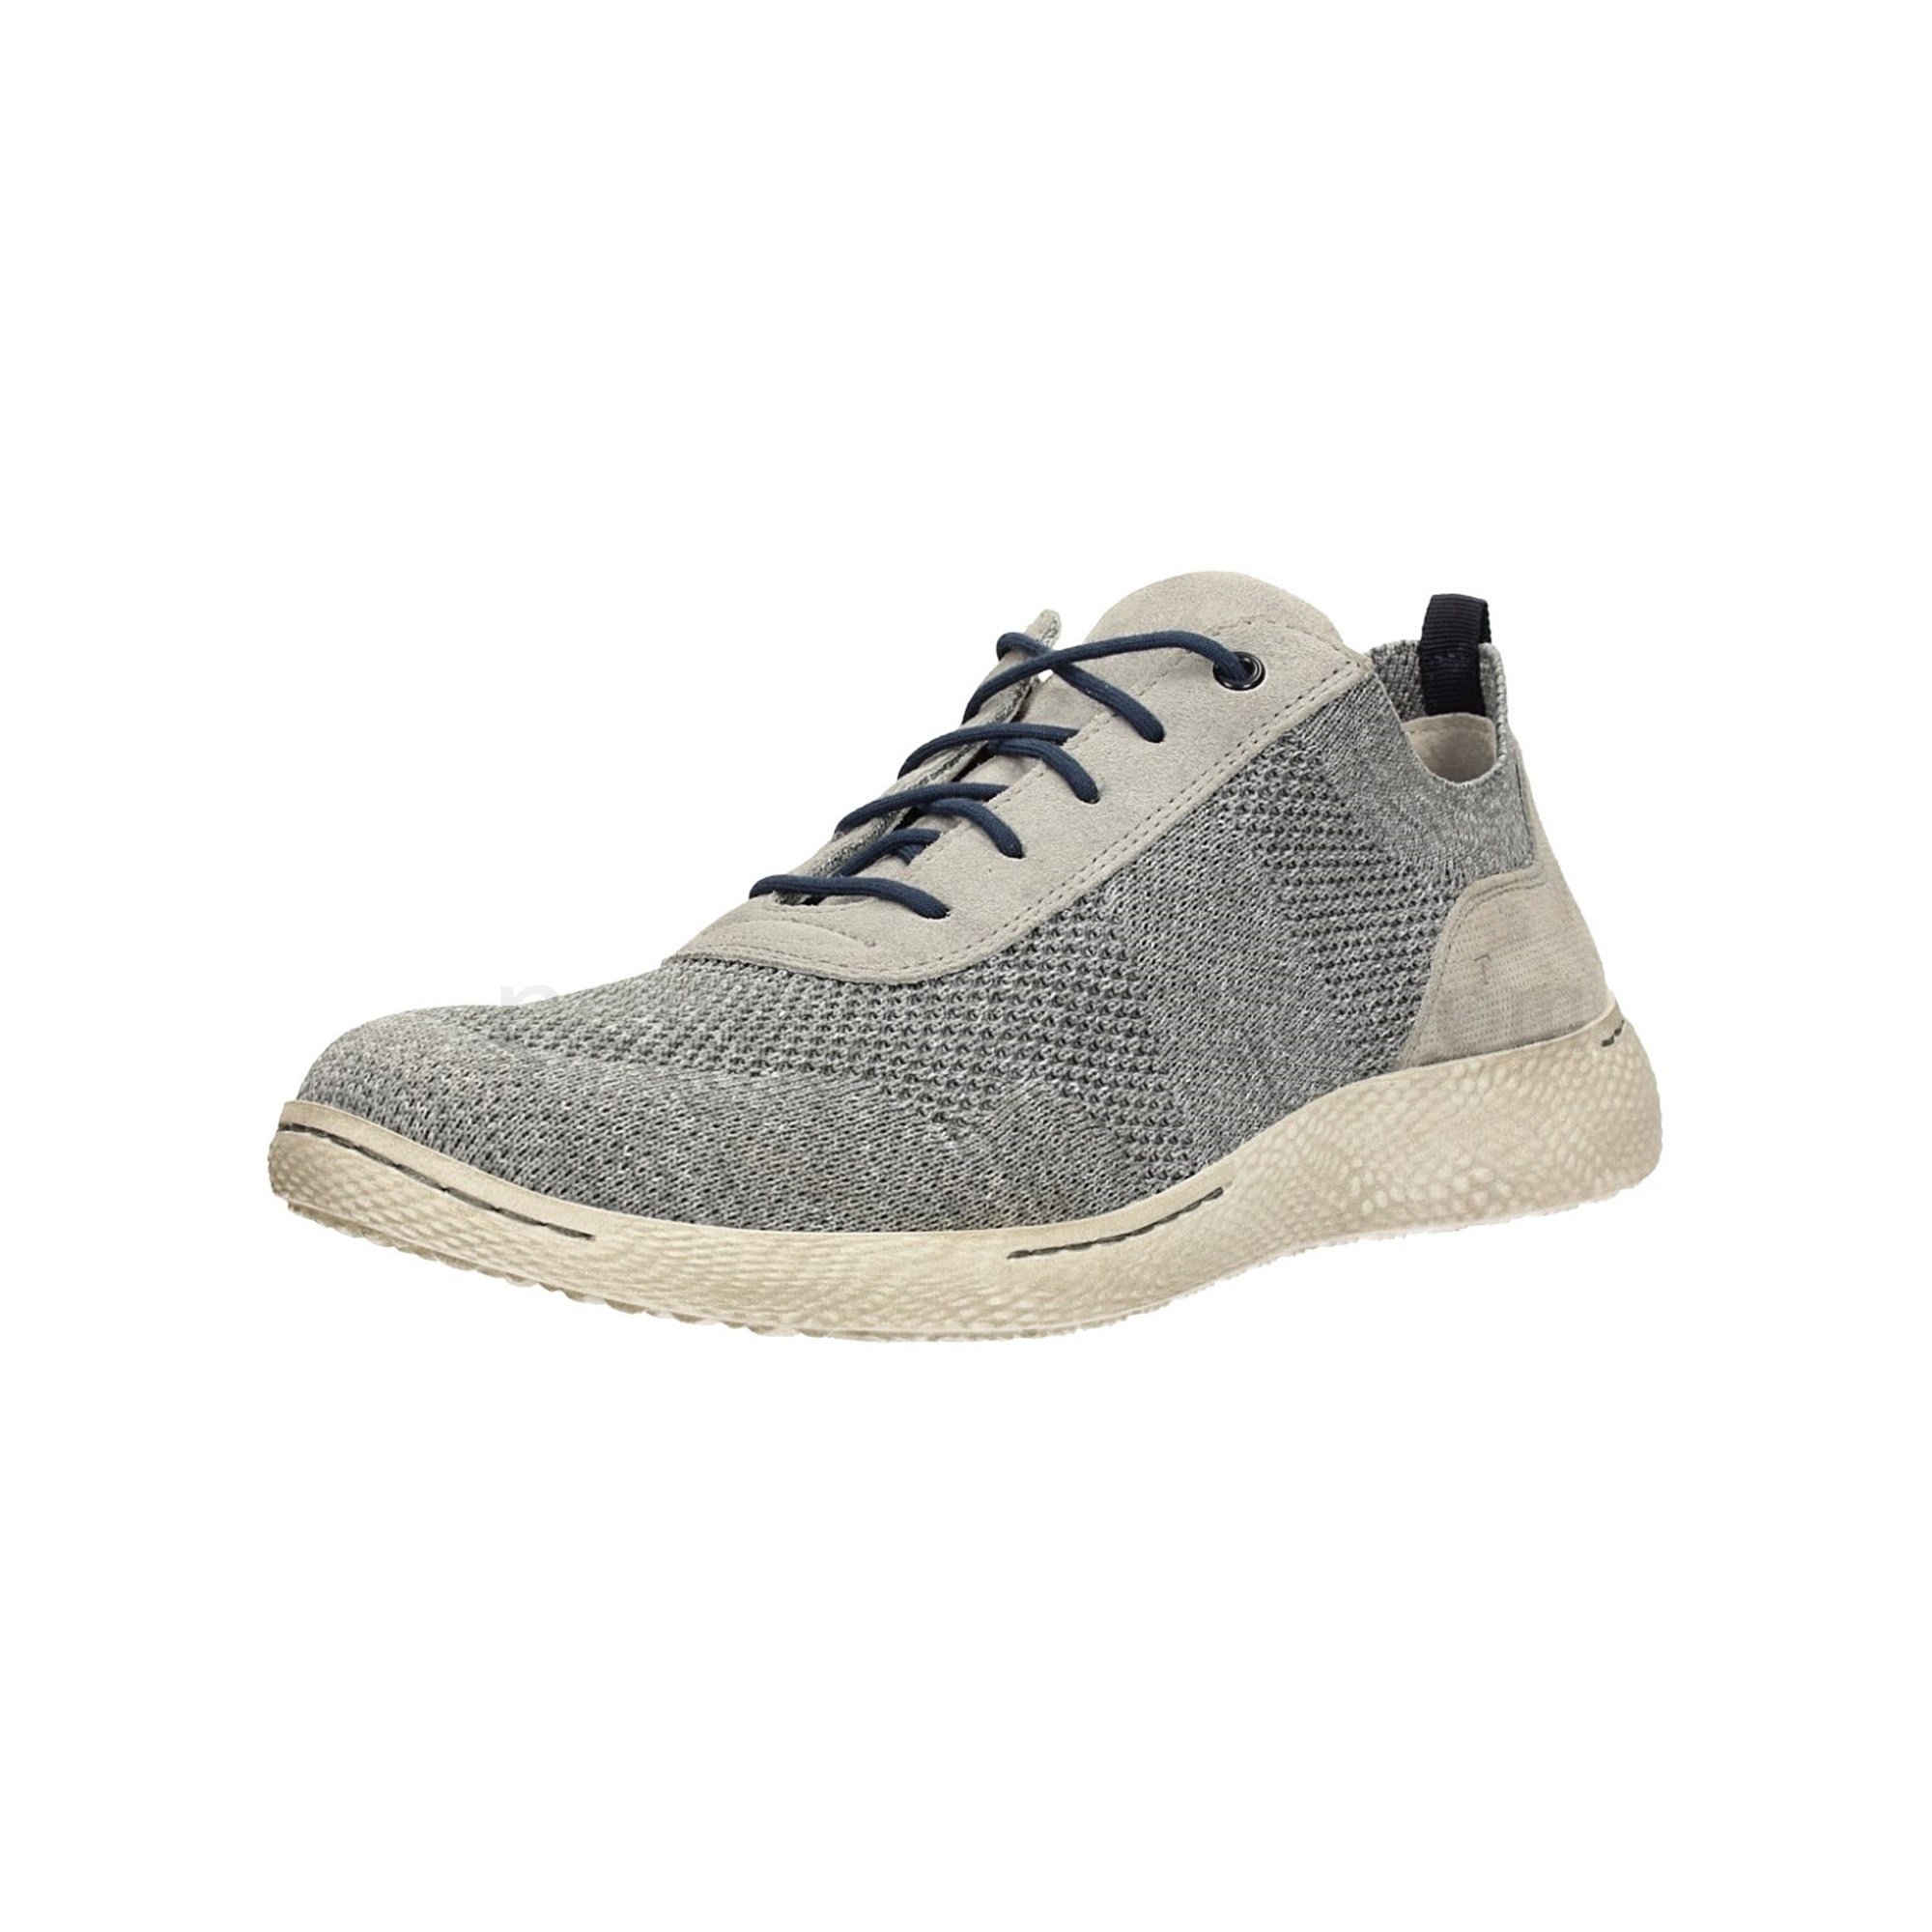 Sneakers in knit, Made in Italy Vendita Online